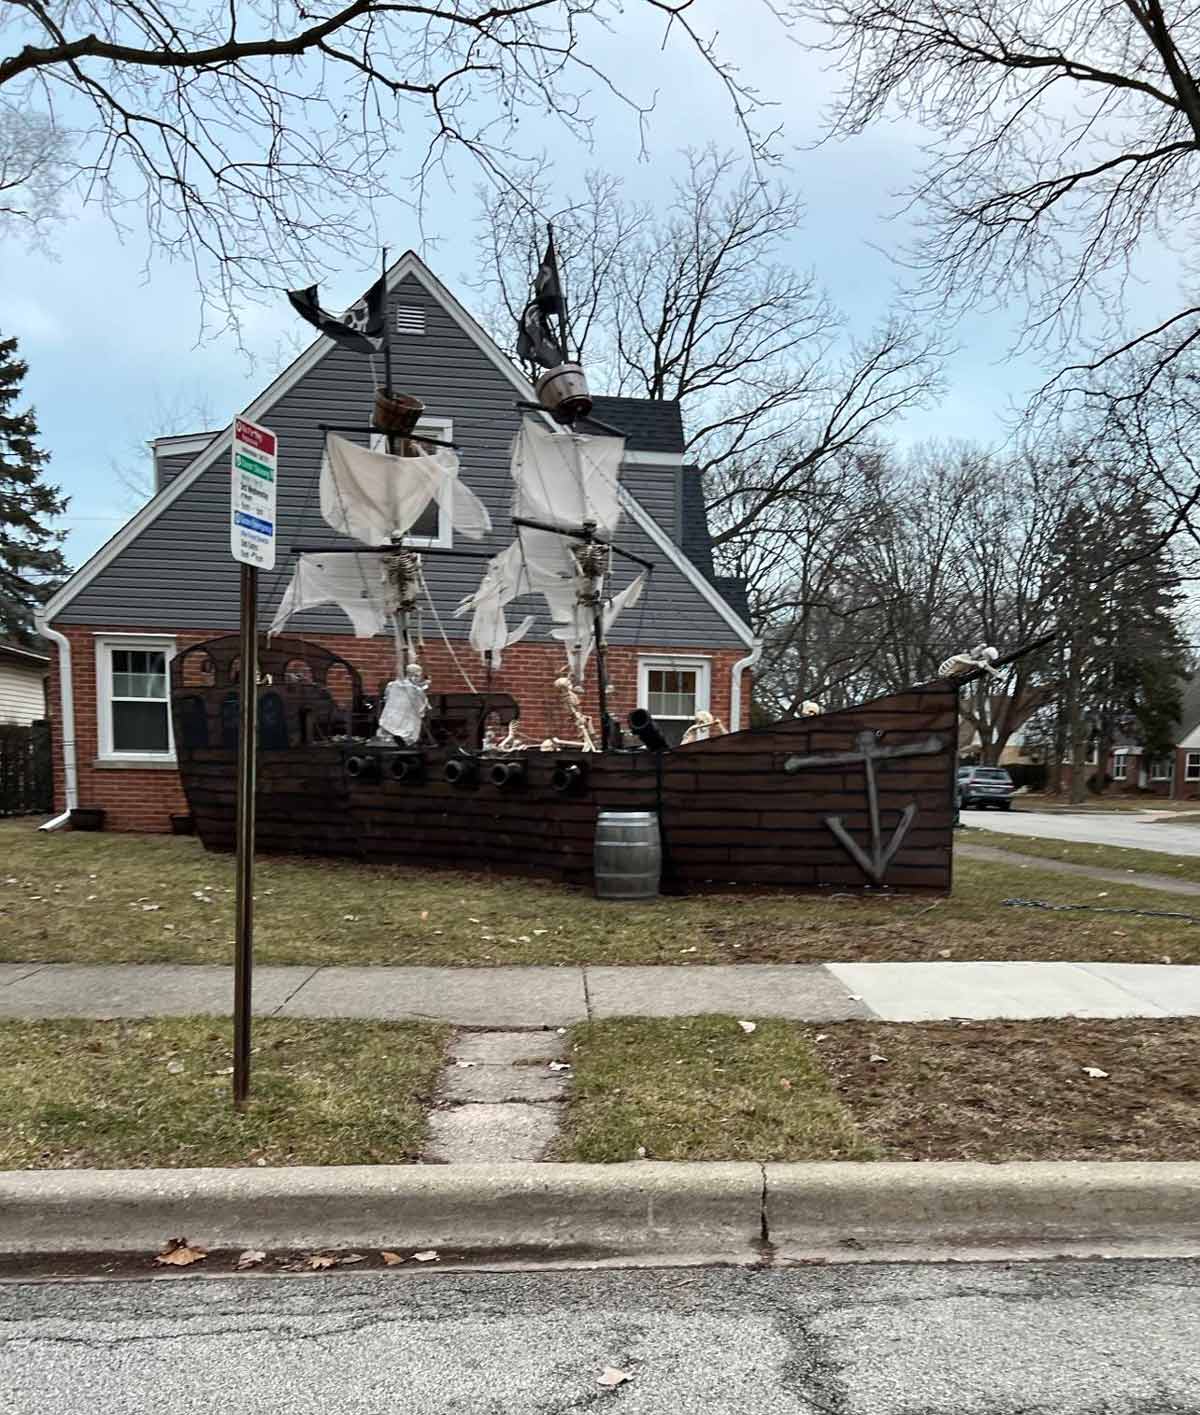 My neighbors have a pirate ship in their front yard. Cool Stuff